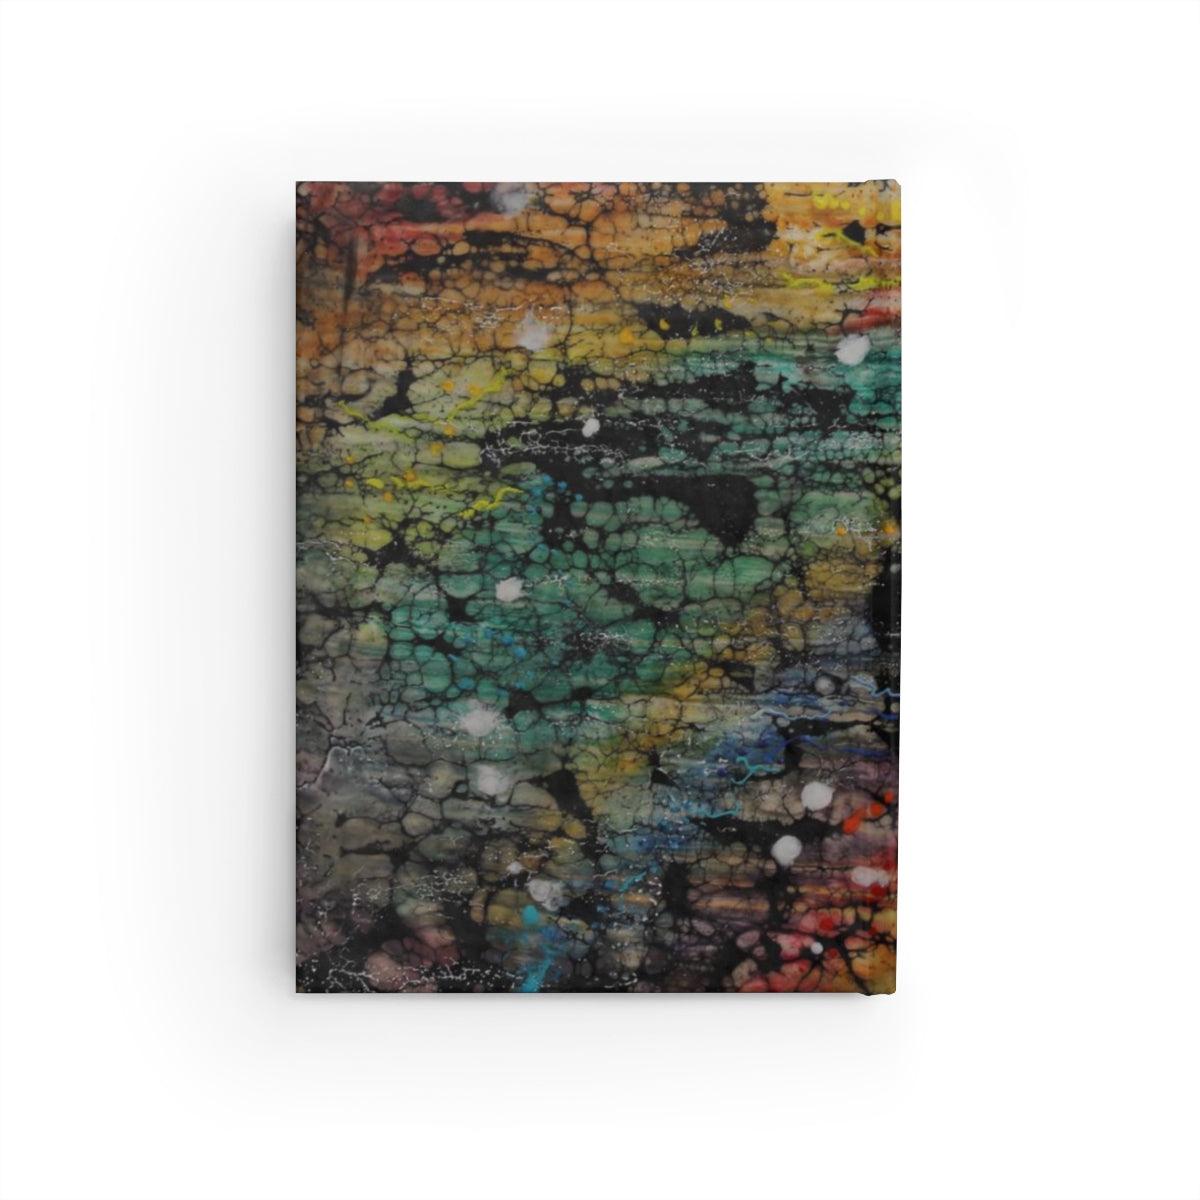 "Synapse 2" Journal - Ruled Line-Paper products - Mike Giannella - Encaustic Painting - Mixed Media Artist - Art Prints